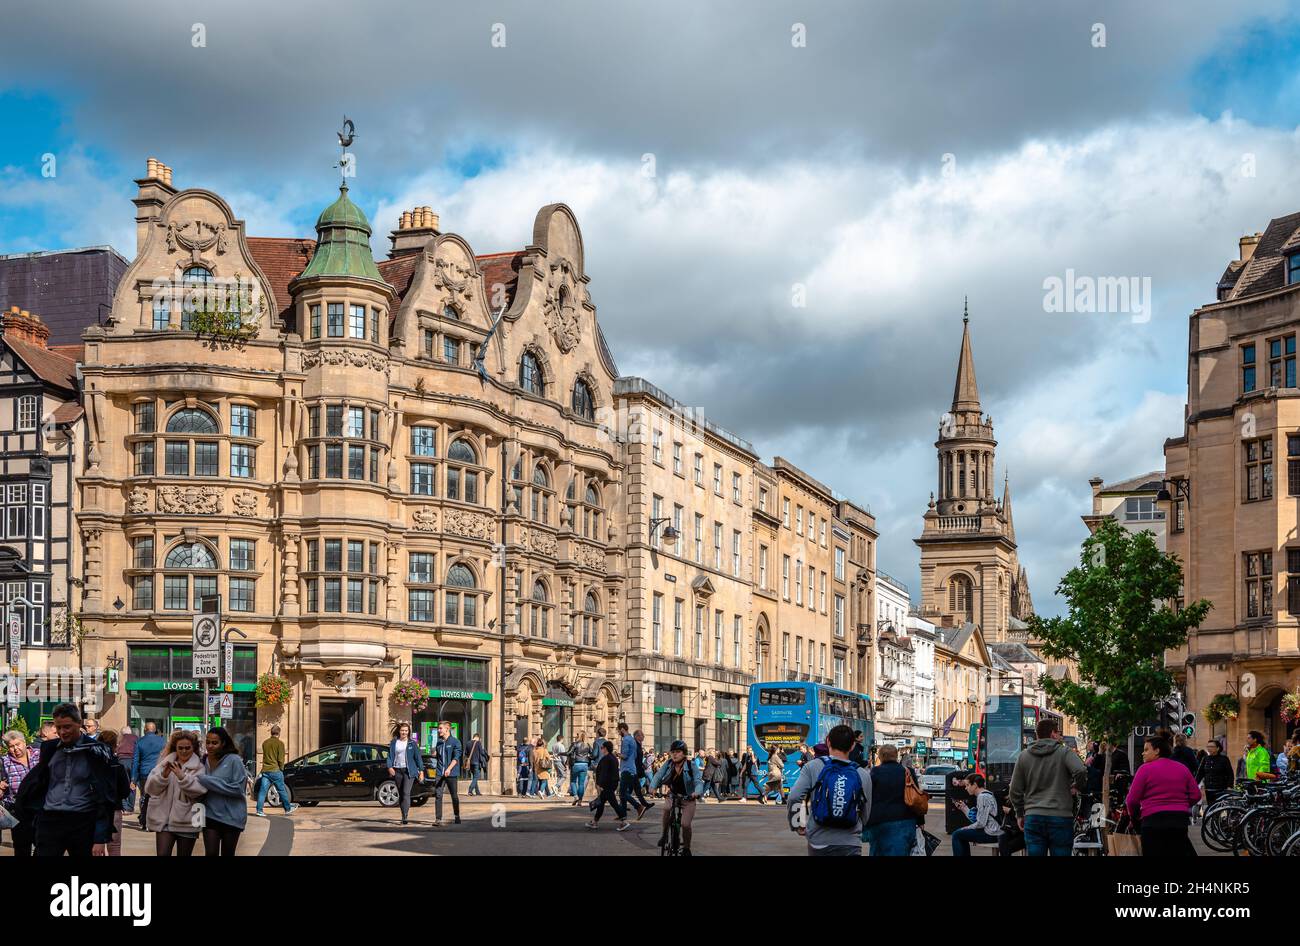 The junction of High street, Queen st, St Aldates and Cornmarket street in the inner city. The Lloyds bank building dominates the picture. Stock Photo